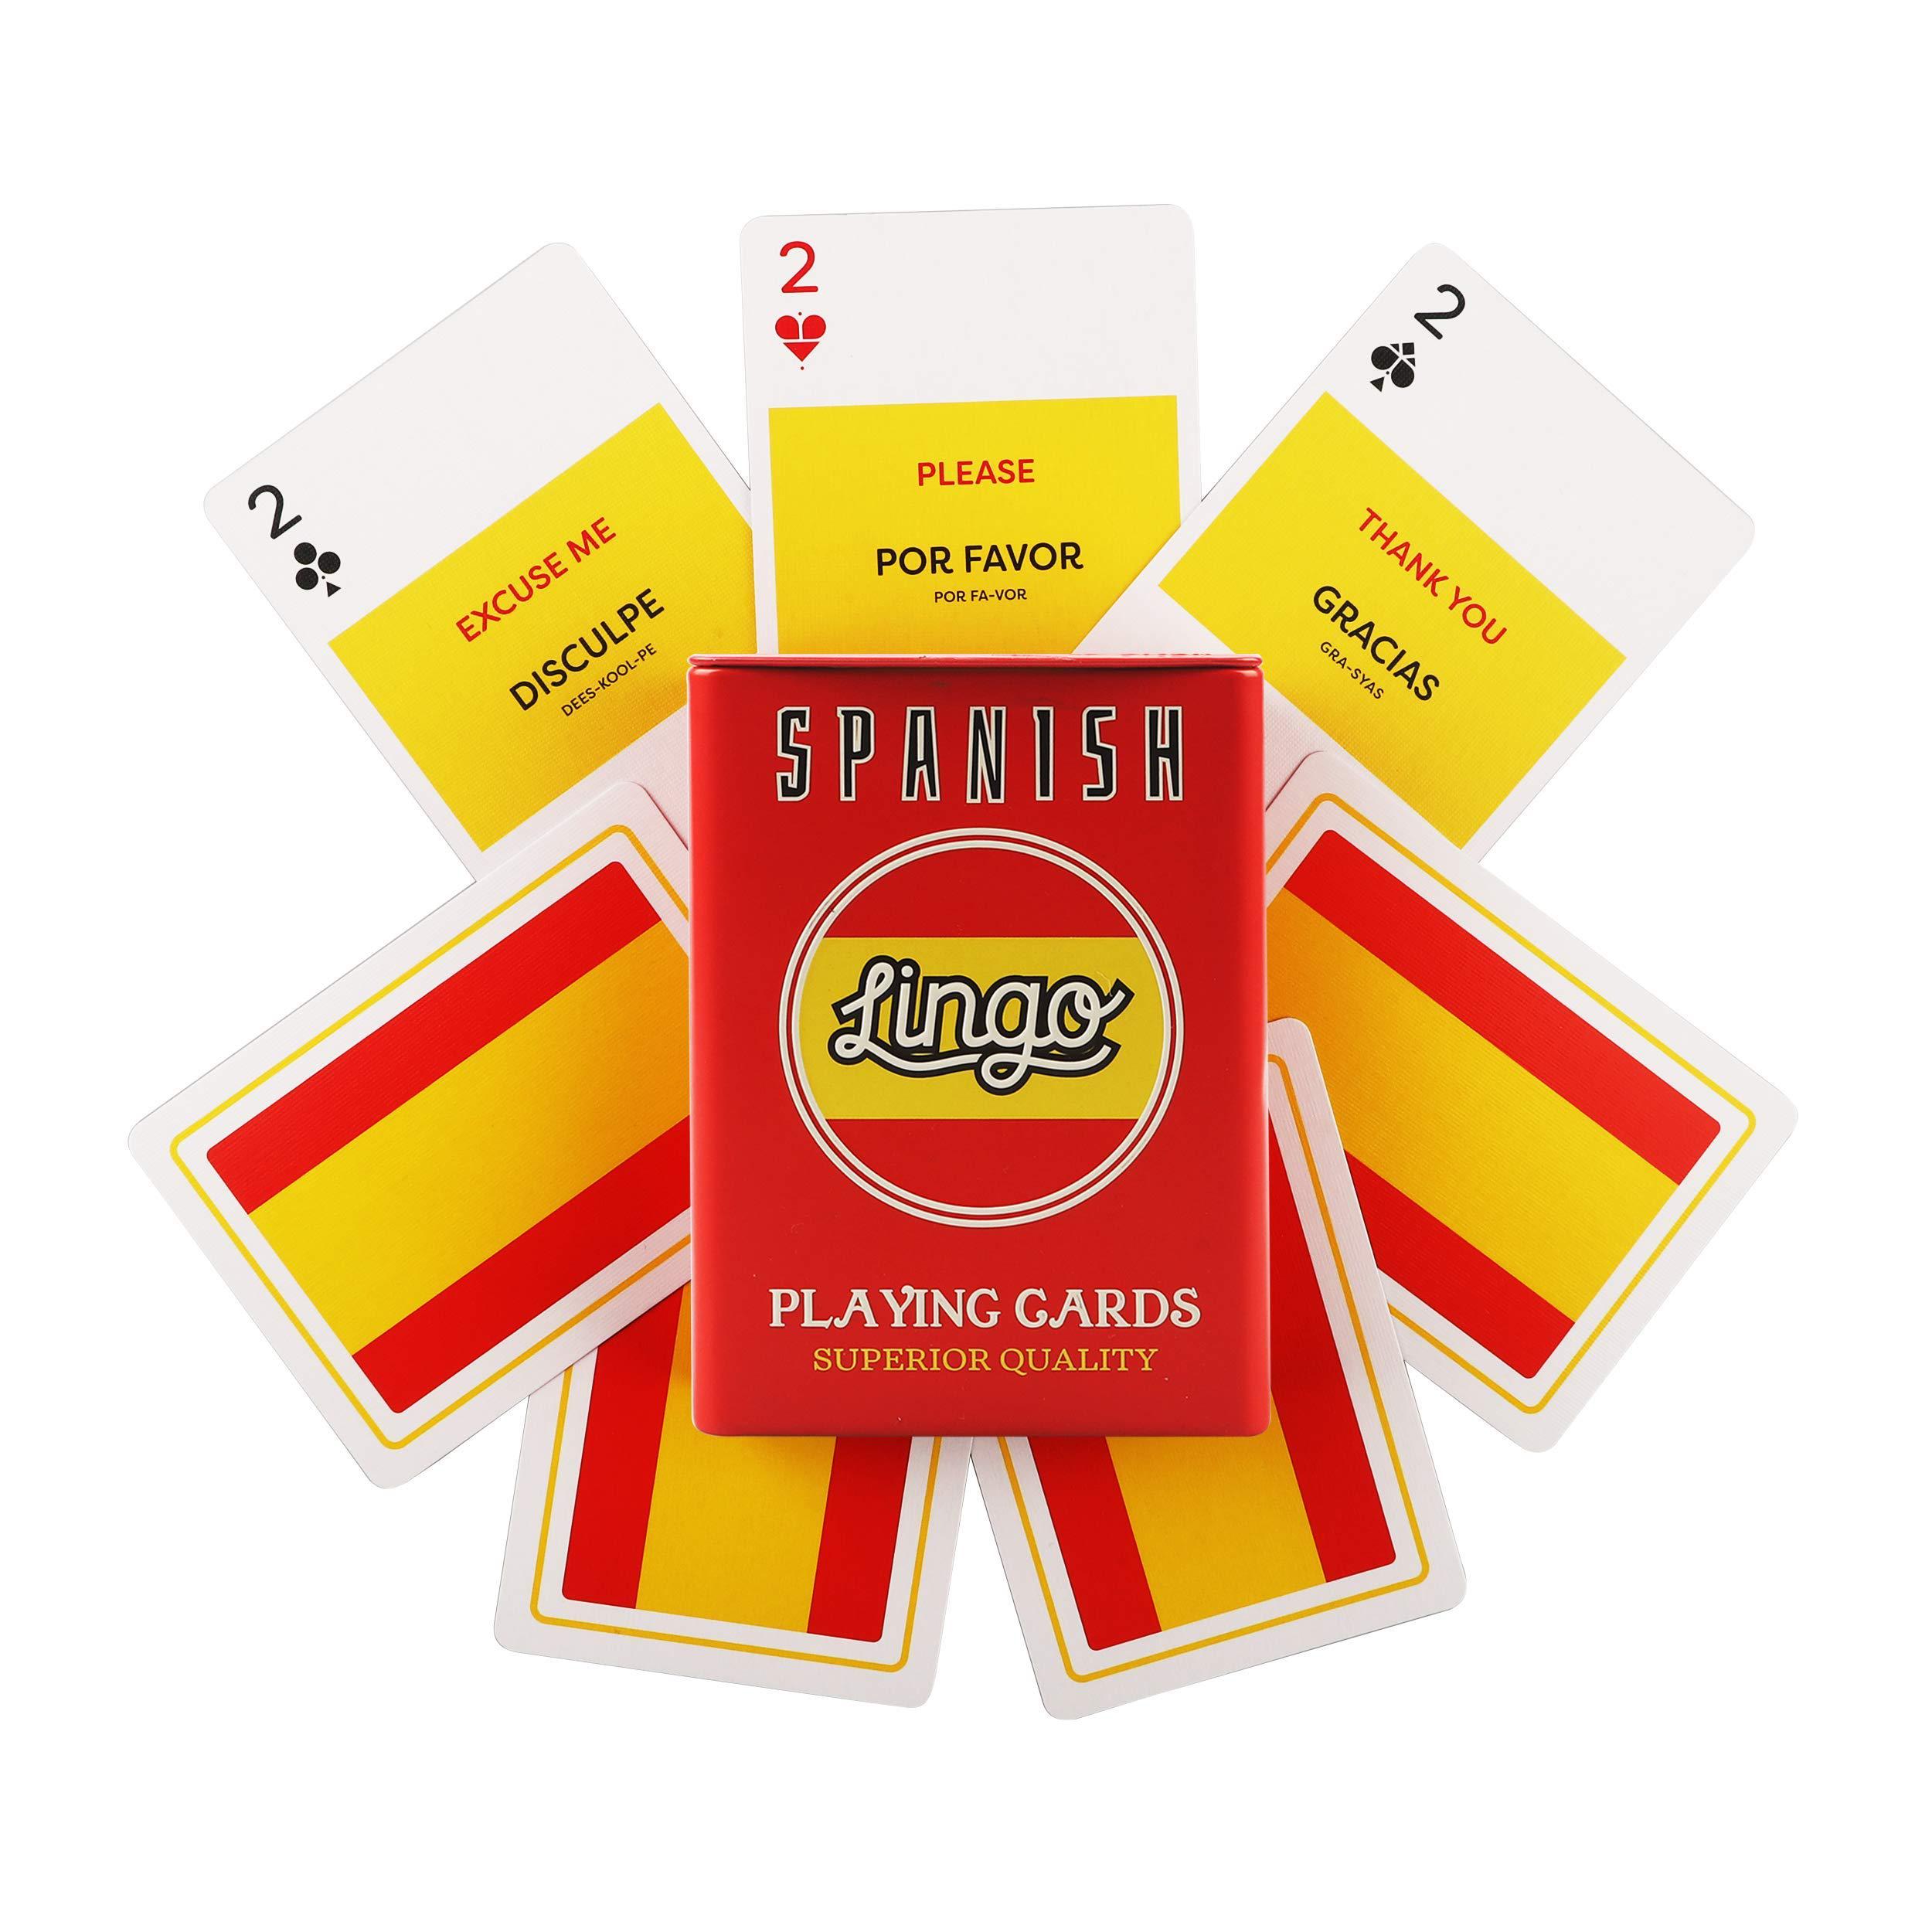 lingo spanish cards in tin box - the best playing cards for beginners to learn spanish vocabulary & pronunciation in a fun & 